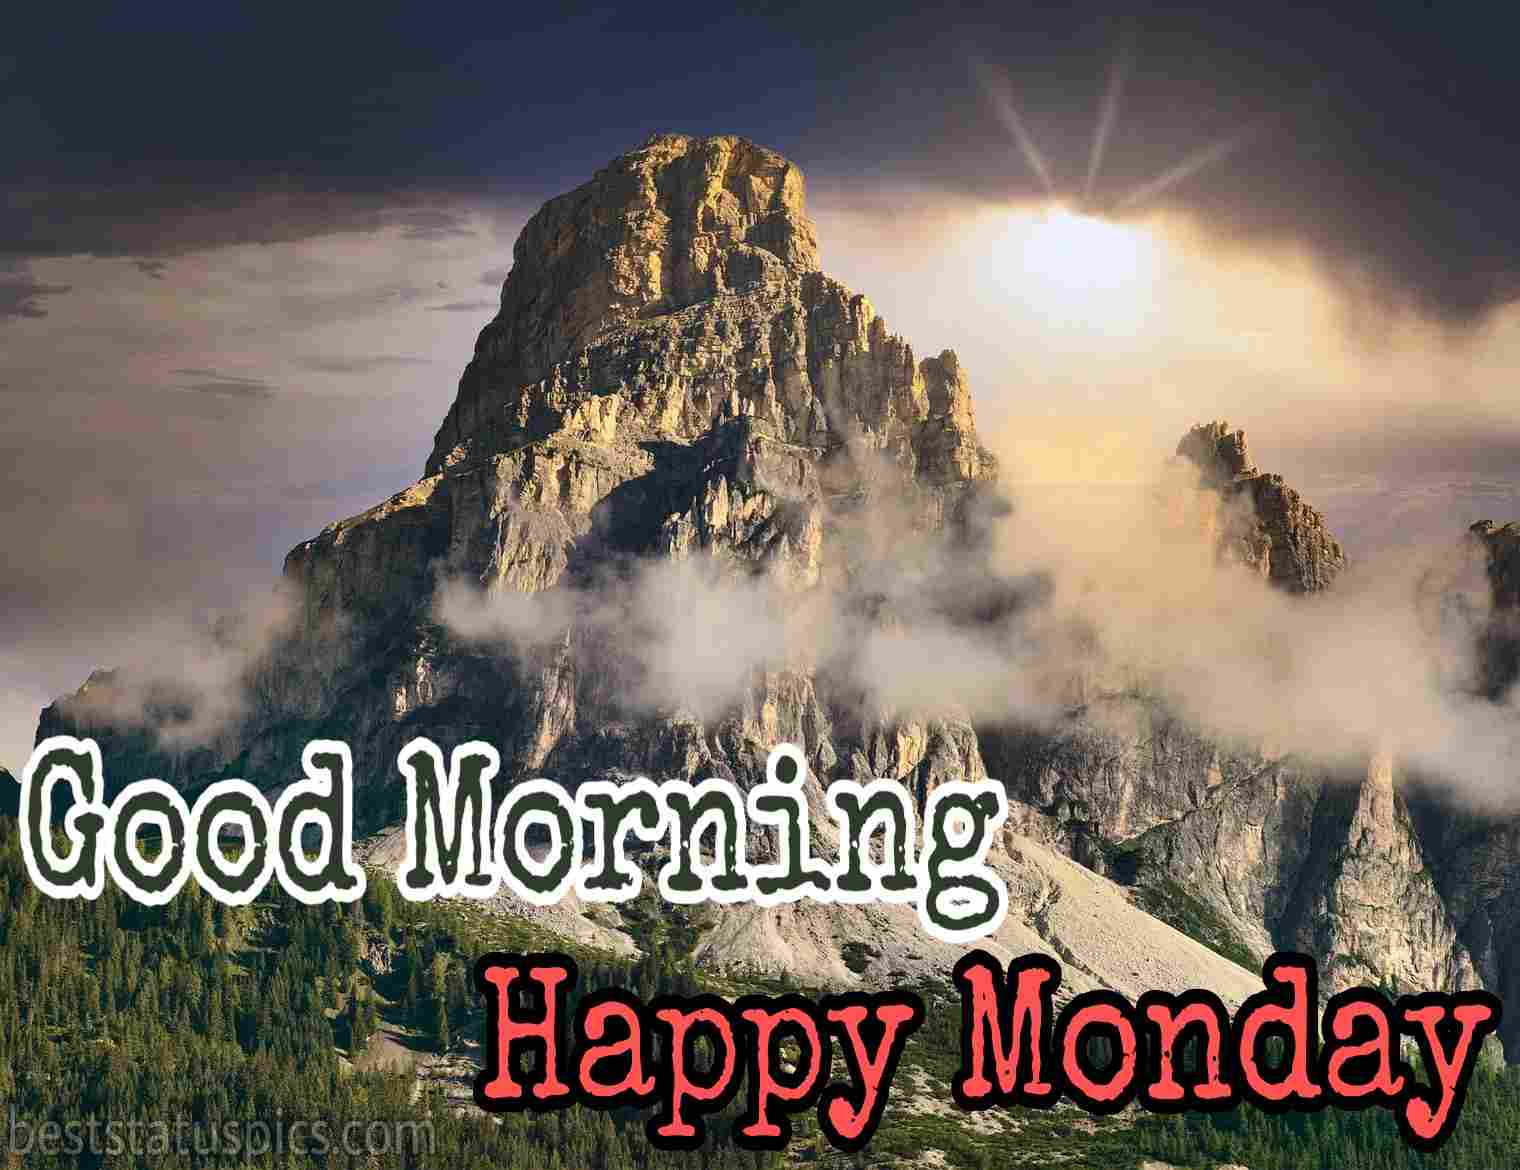 51+ Good Morning Monday Images, Happy Monday Images & Wishes